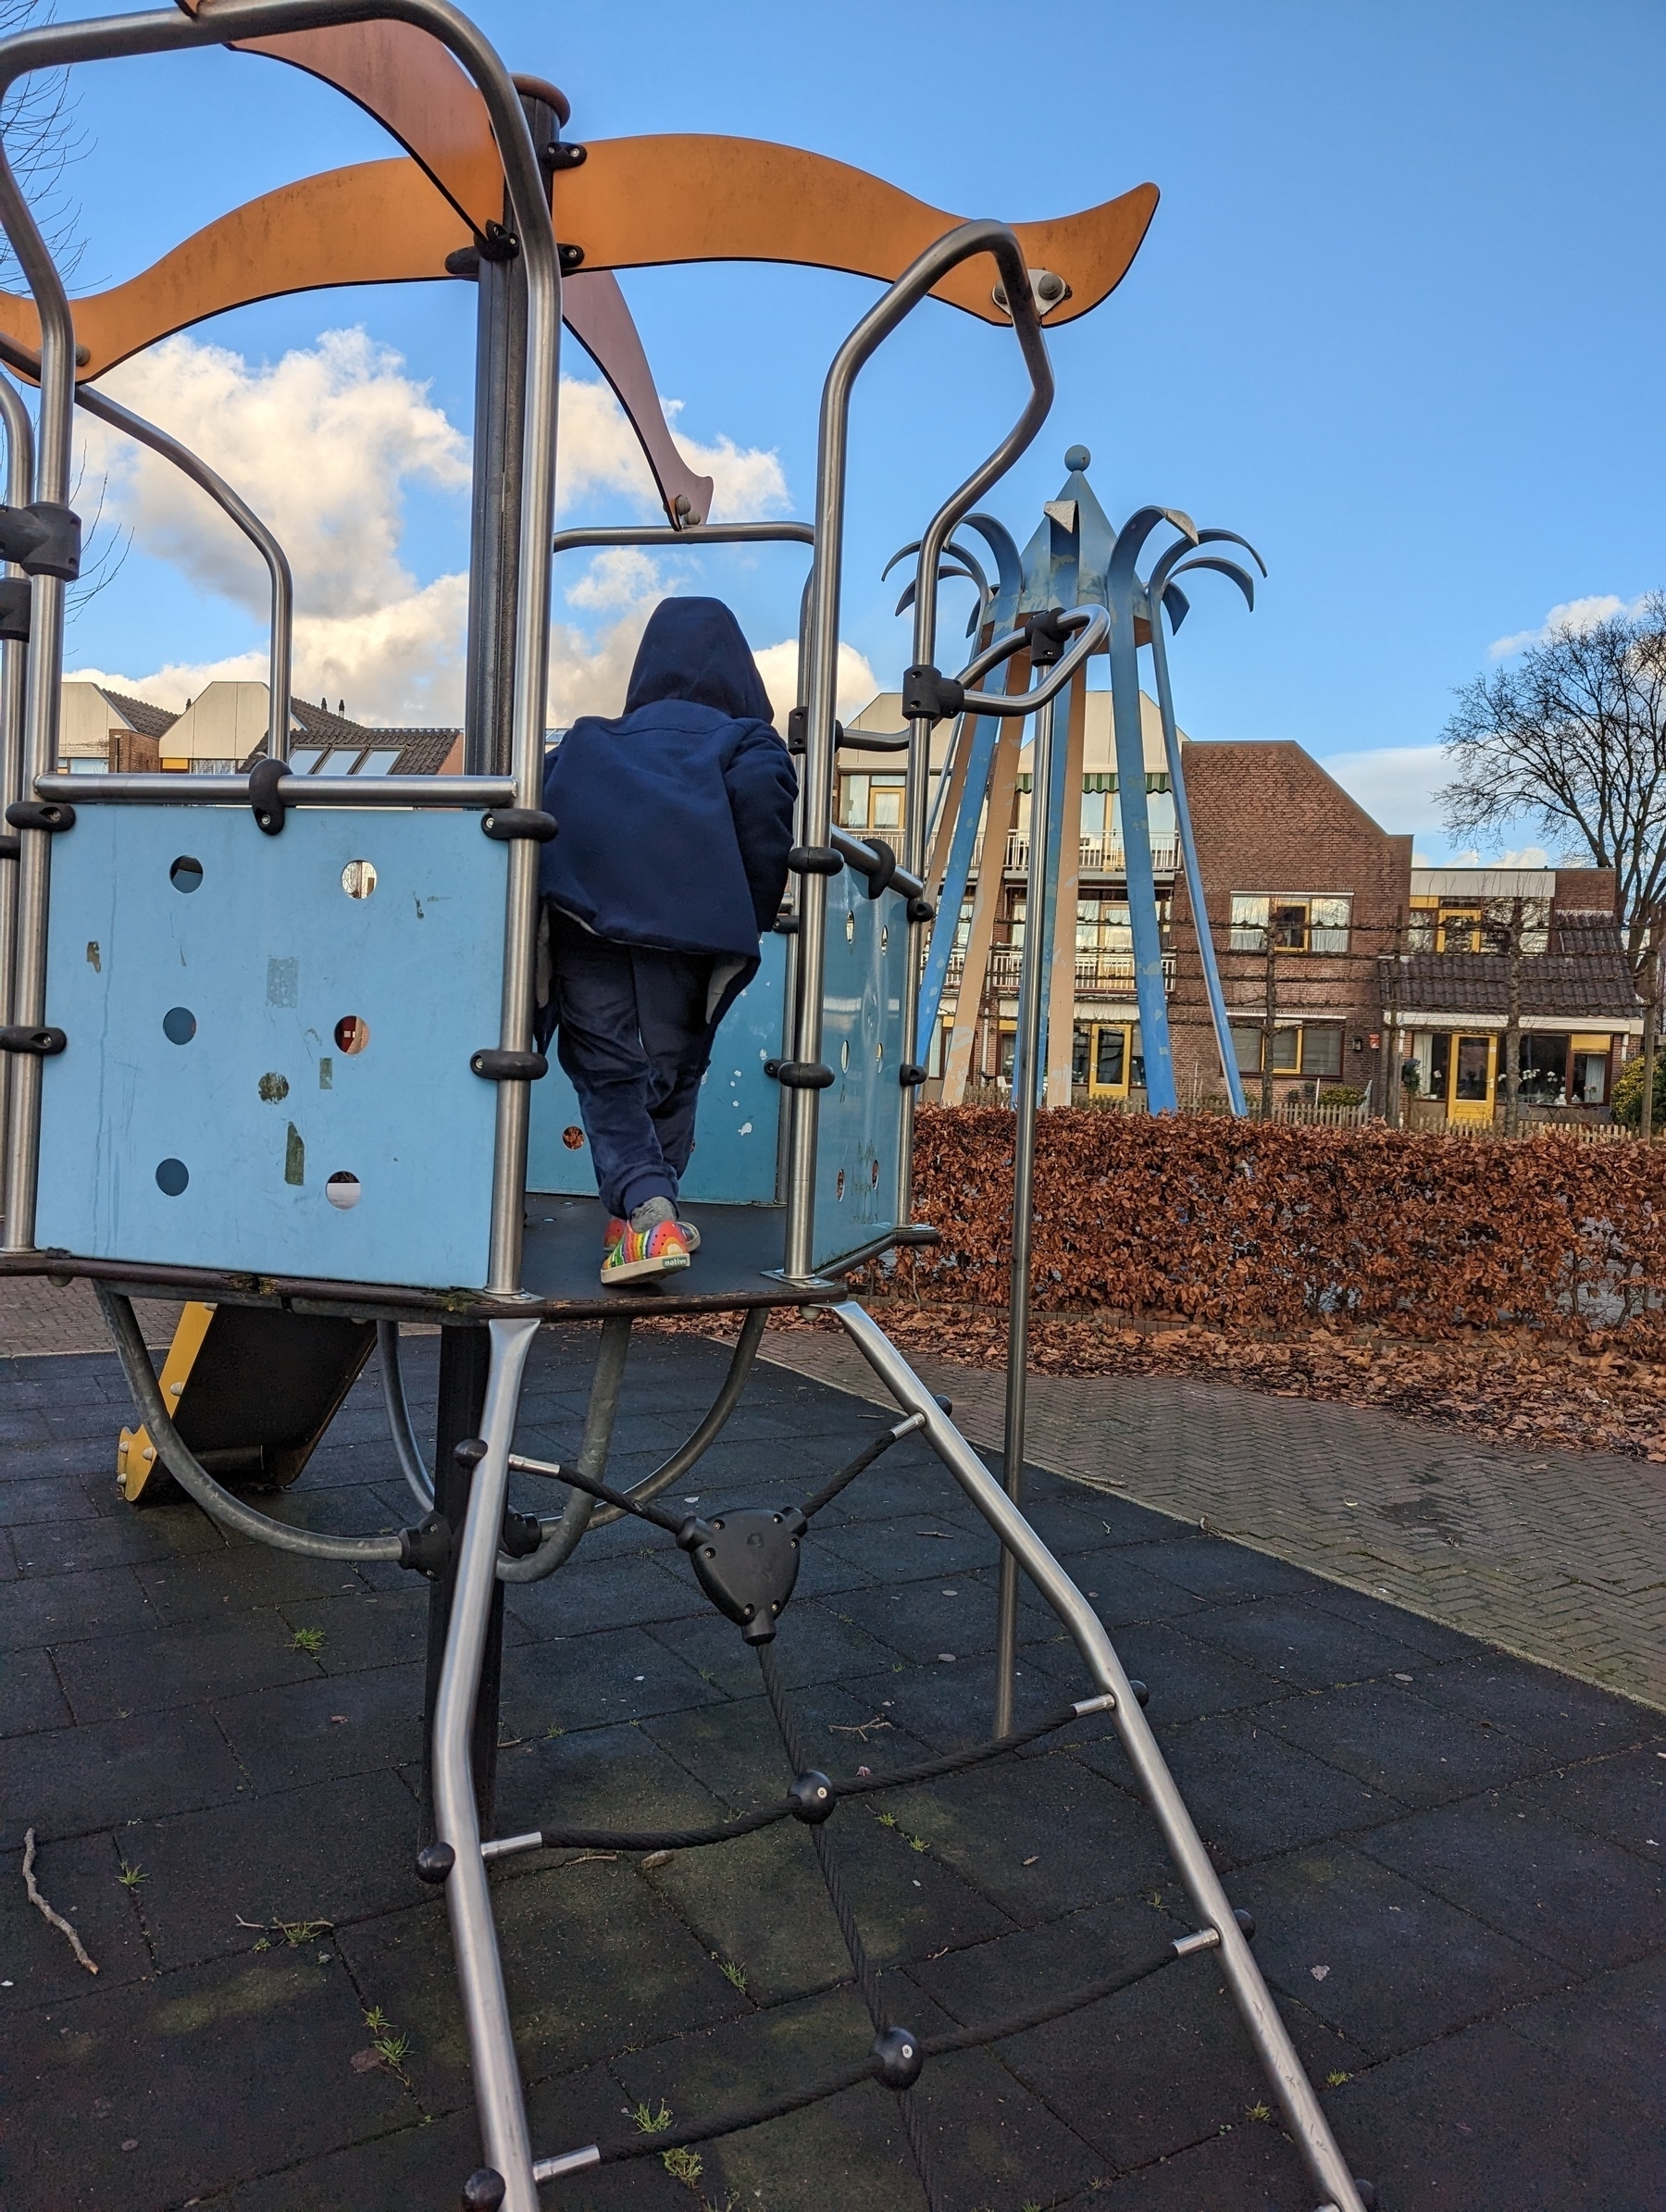 A child plays on a small playground.